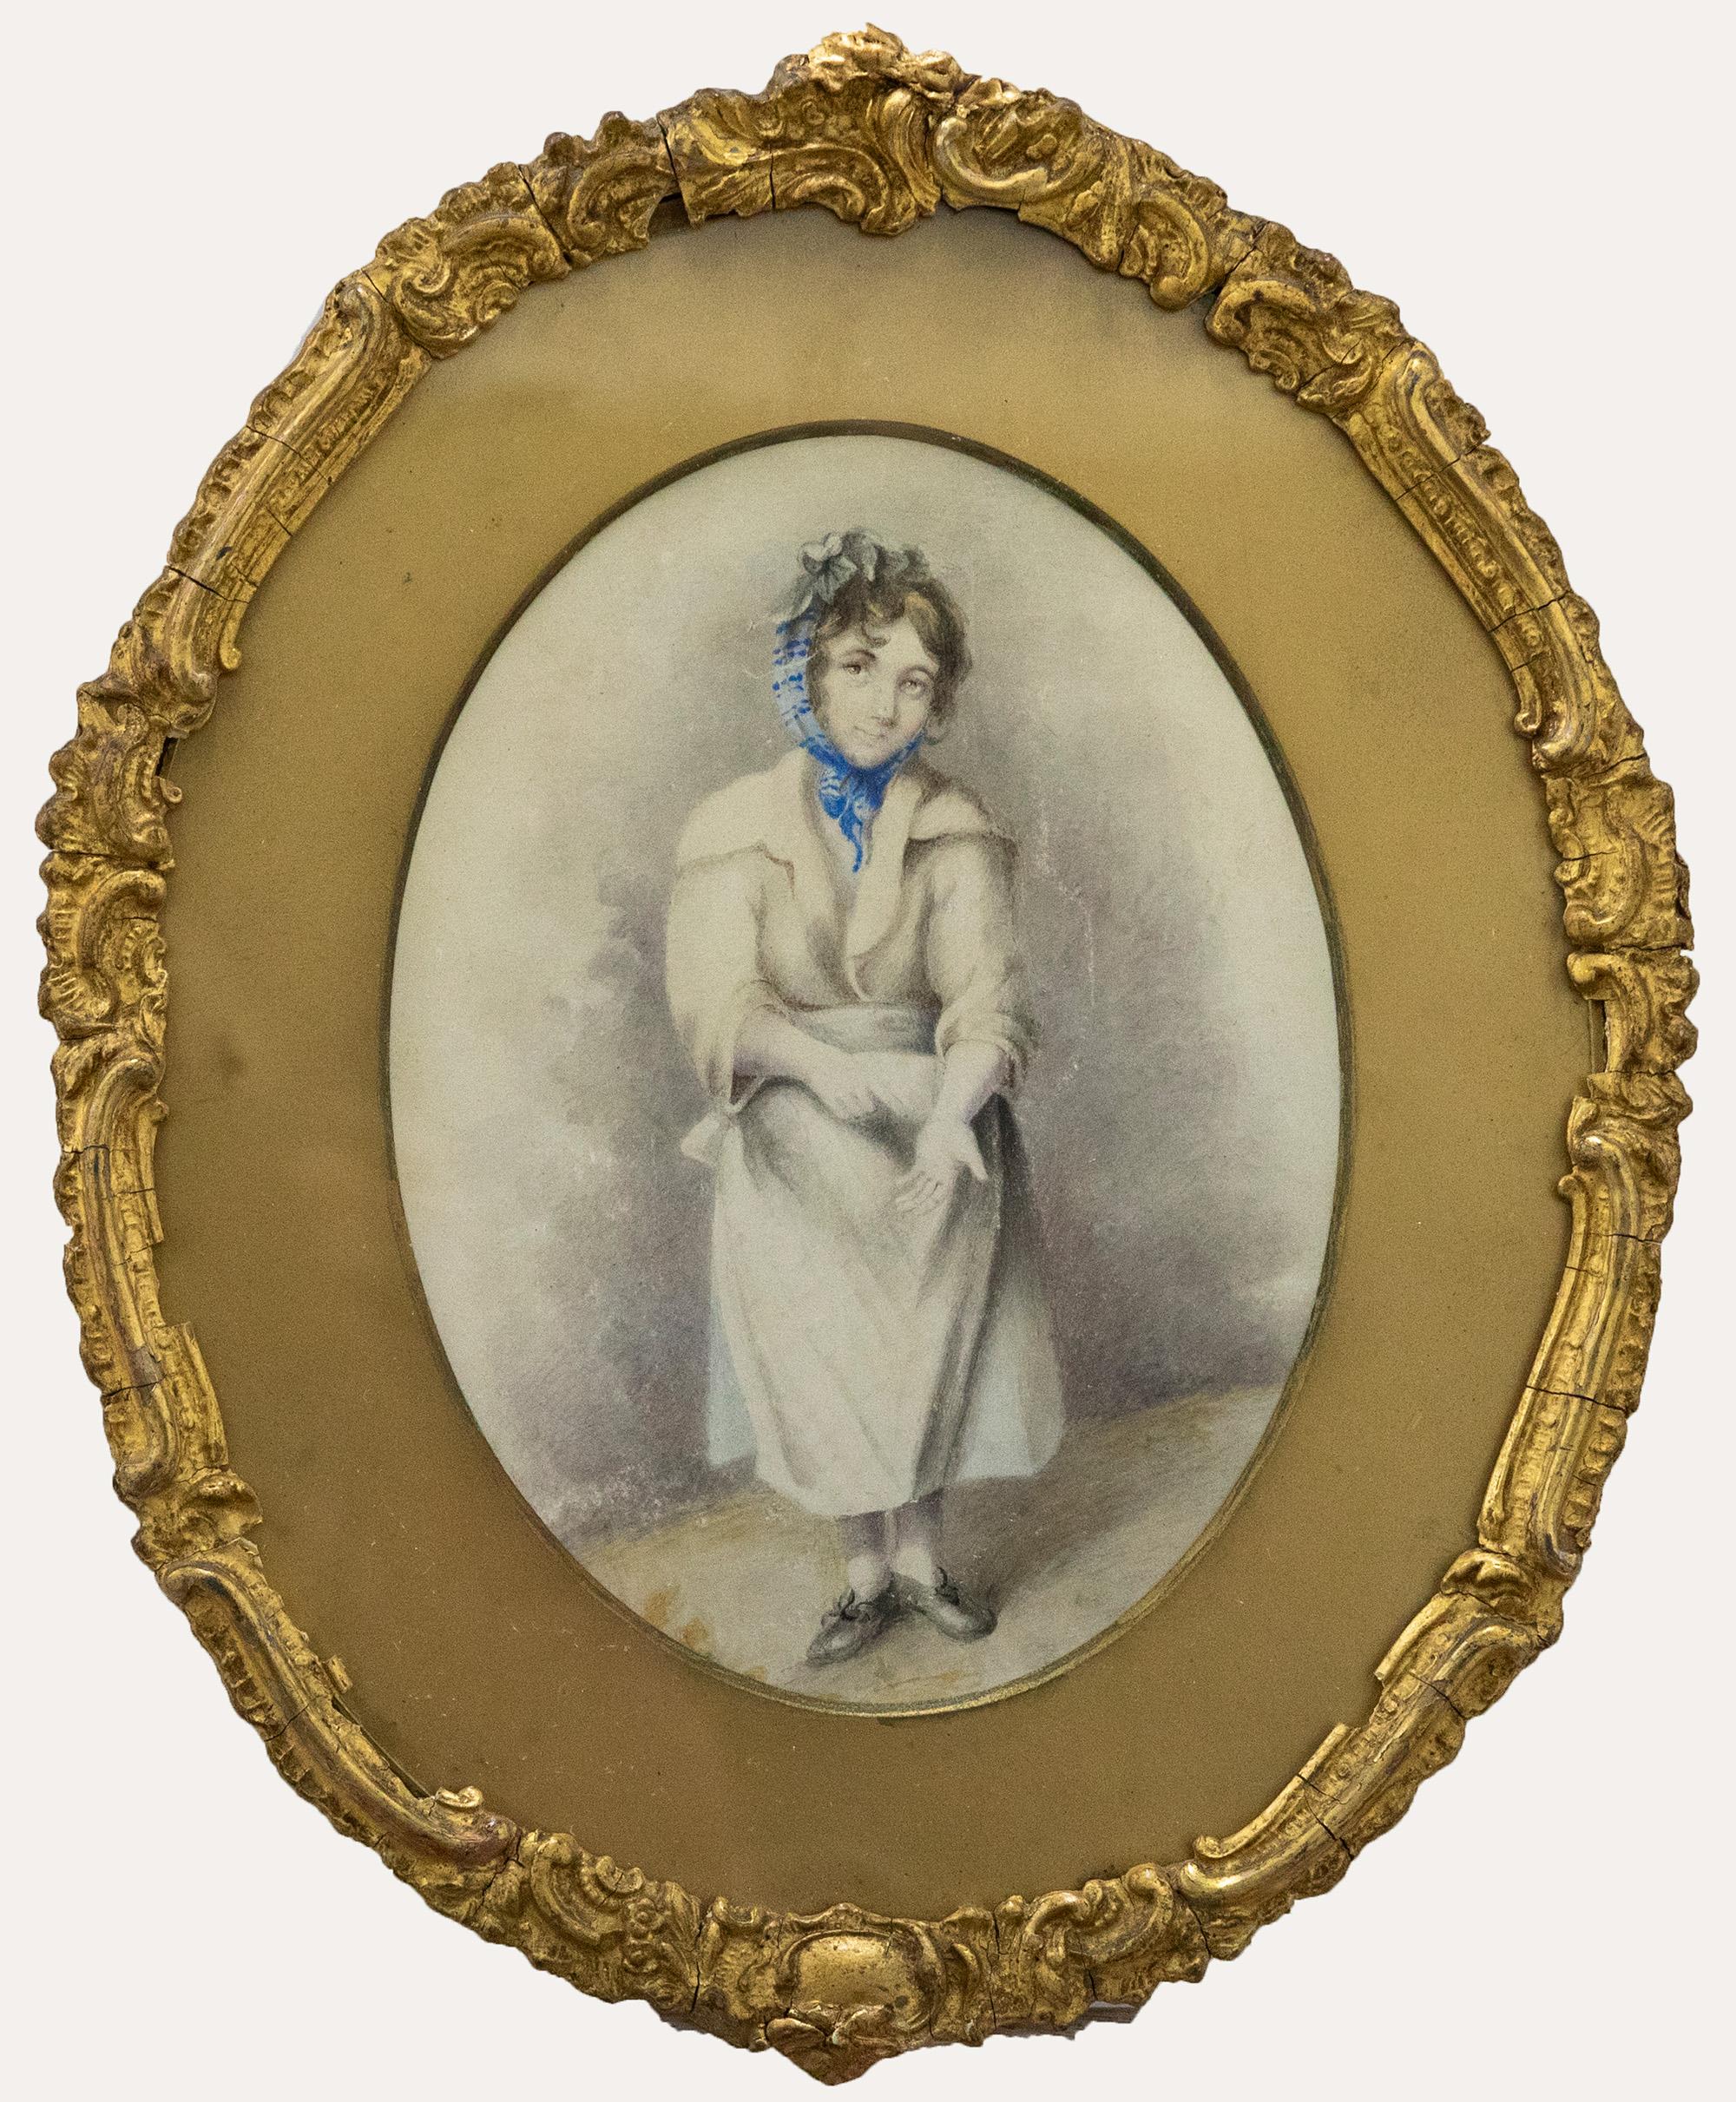 Early 18th Century Portrait Drawings and Watercolors